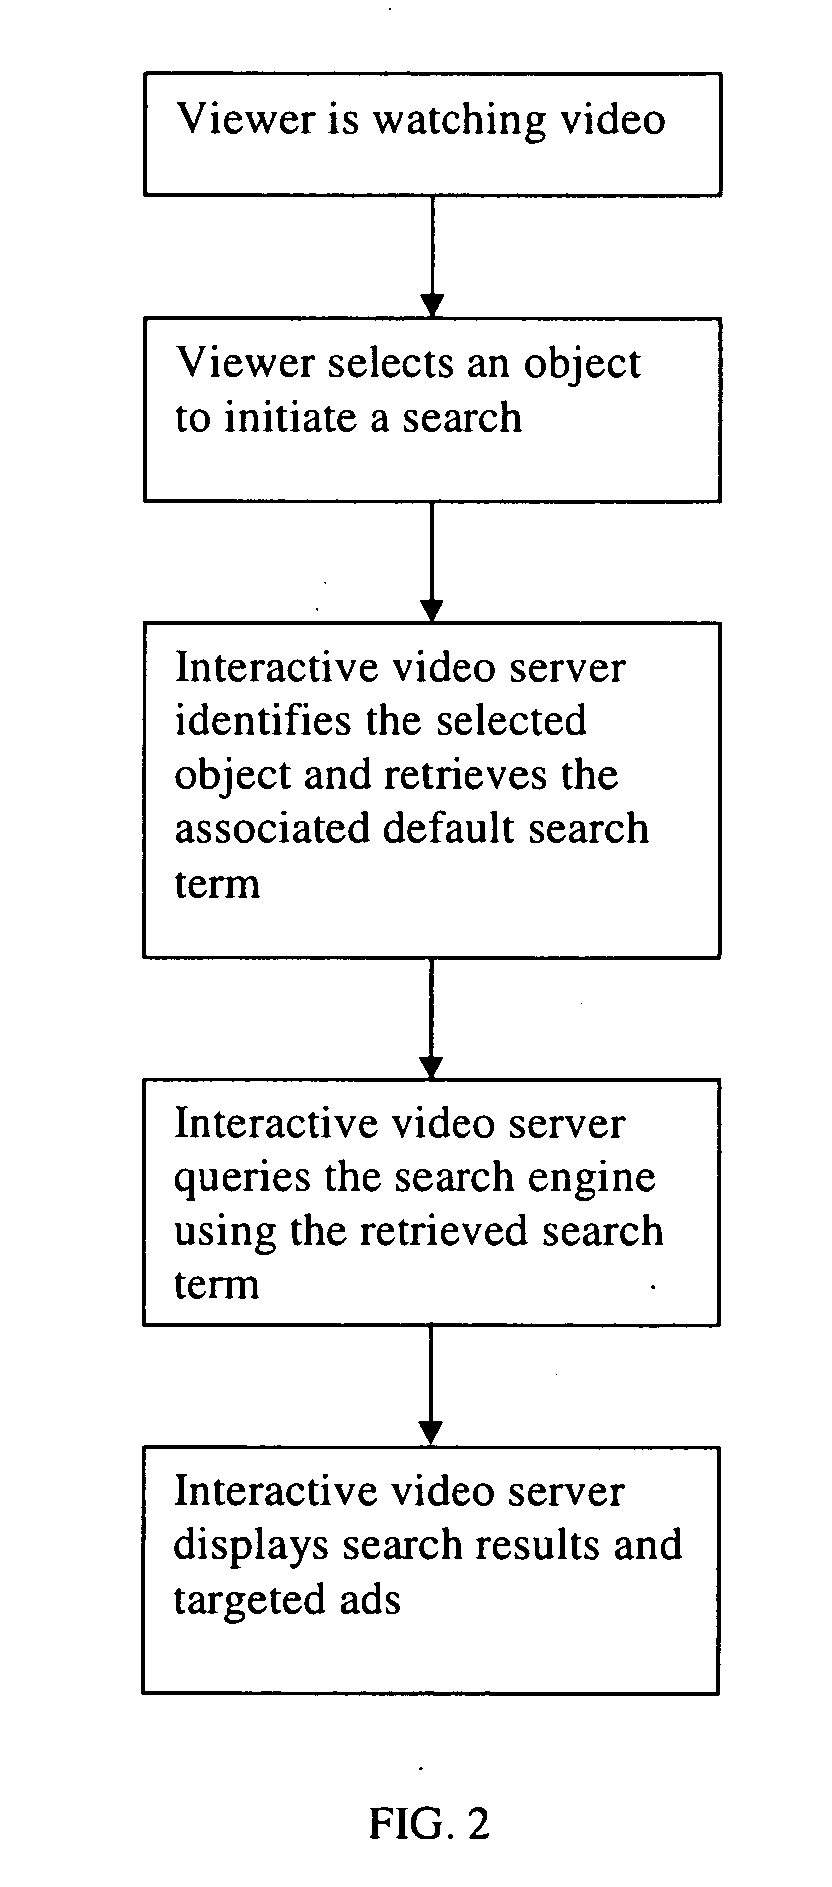 Systems and methods for integrating search capability in interactive video